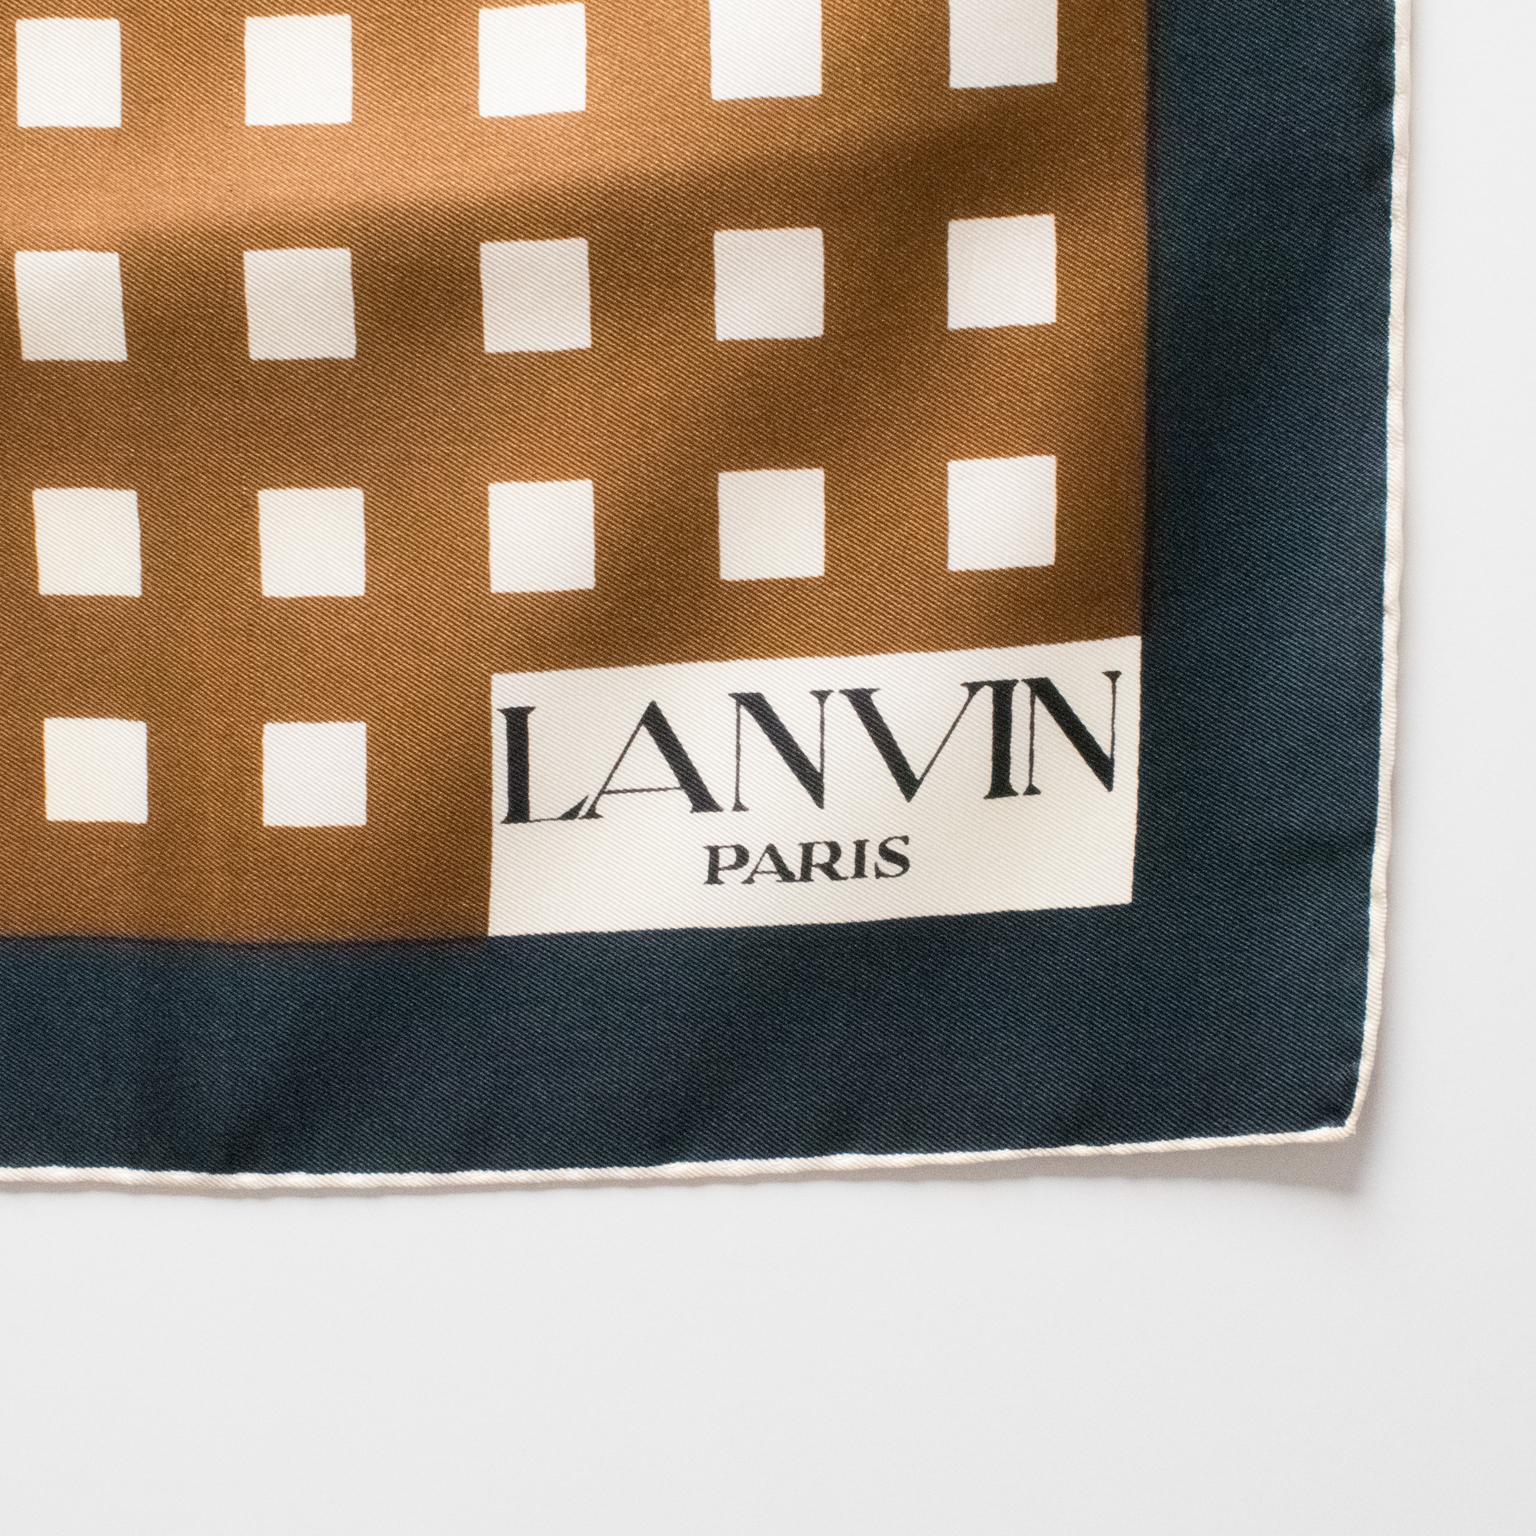 Women's or Men's Lanvin Paris Silk Scarf 1970s Geometric Print in Camel and Brown Colors For Sale